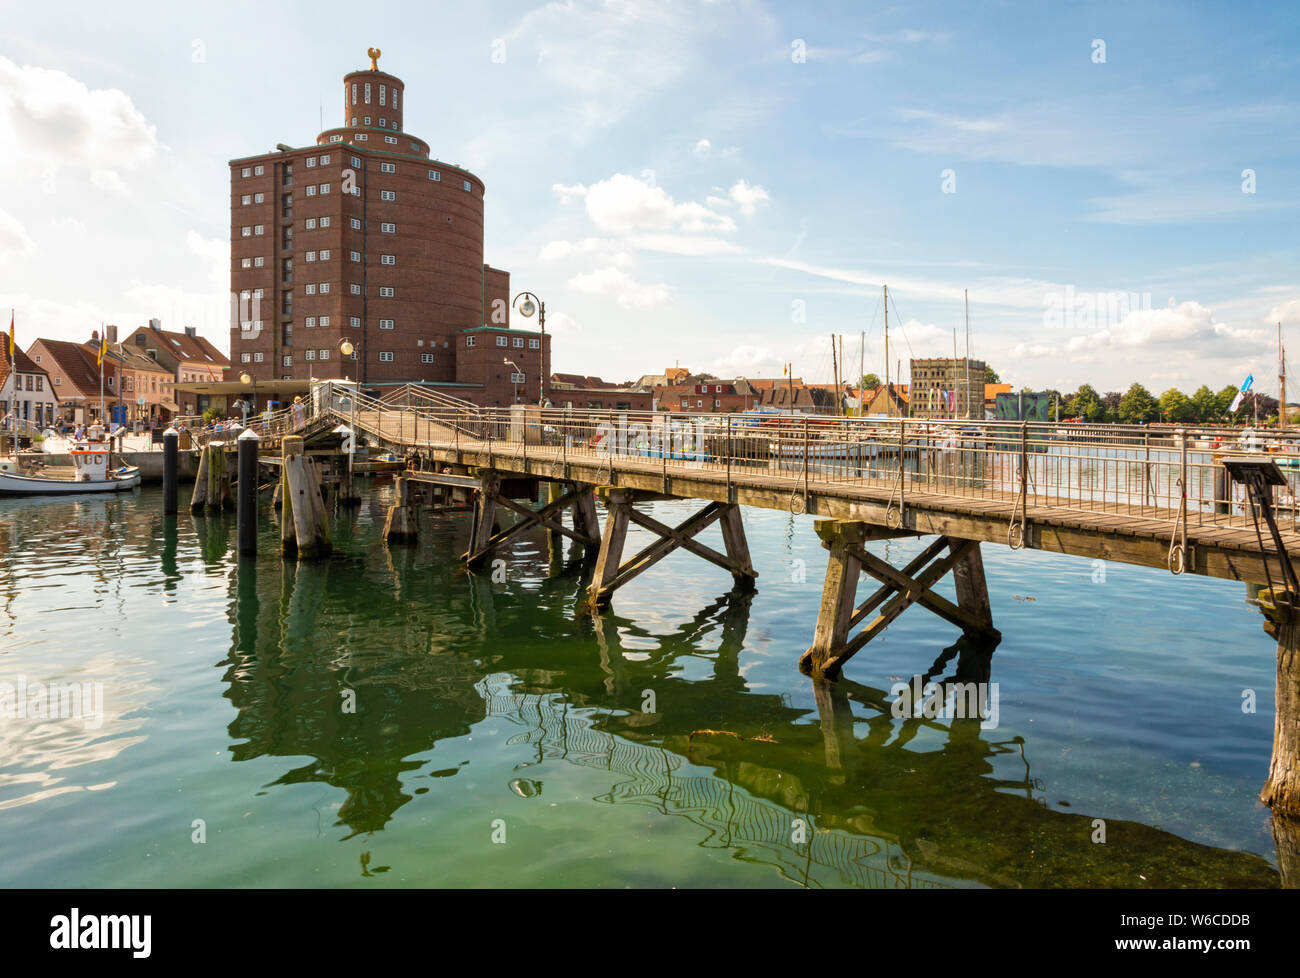 The historic warehouse known as Rundsilo and the wooden drawbridge at the harbor of Eckernförde on the Baltic Sea coast Stock Photo